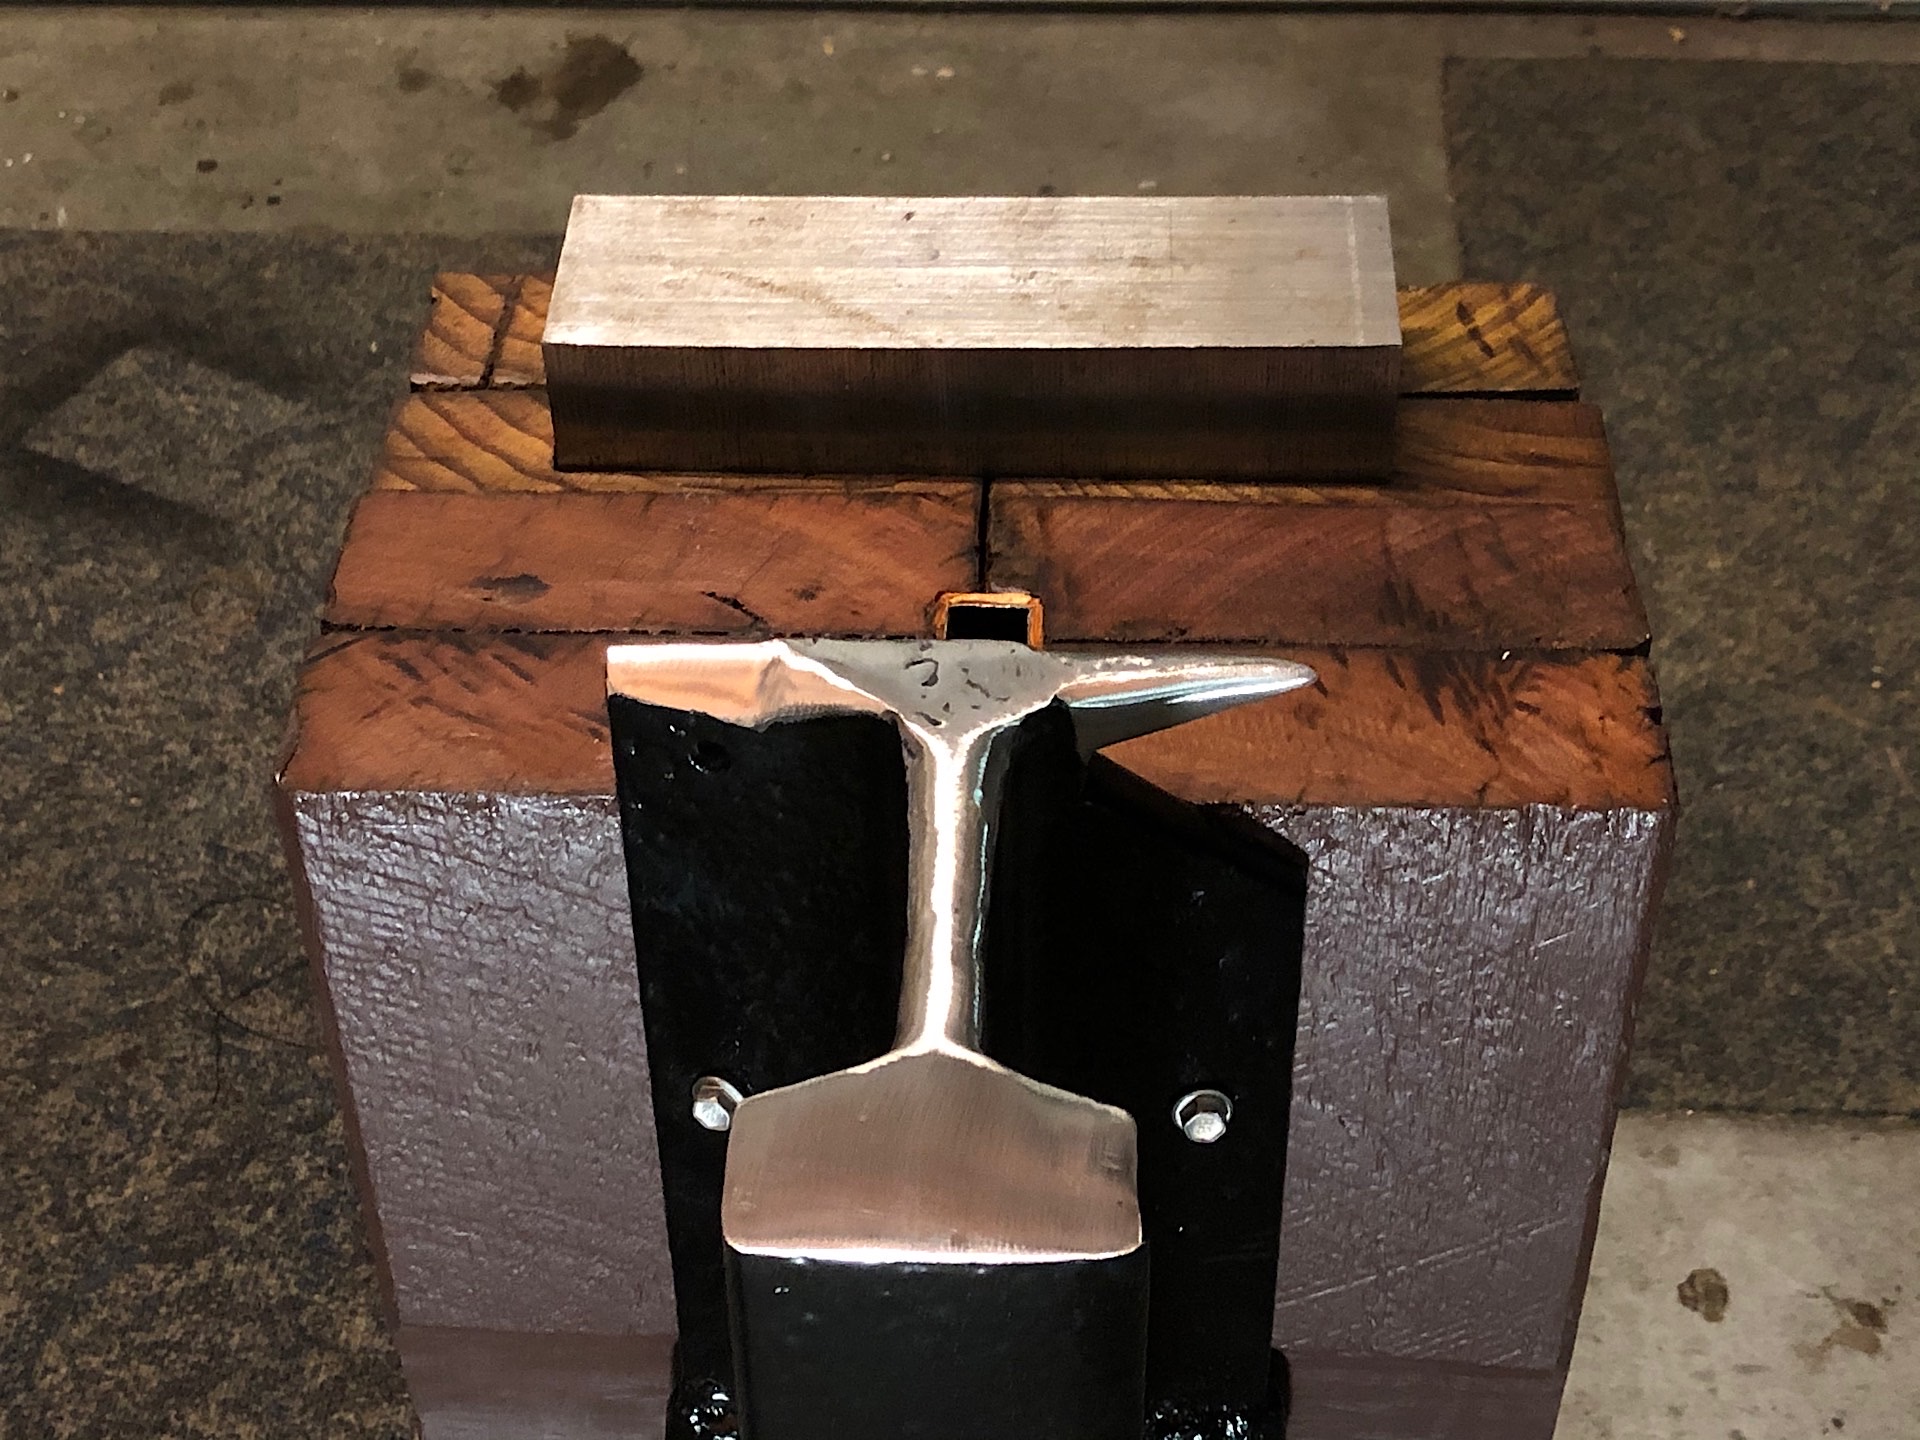 Front view of the DIY anvil